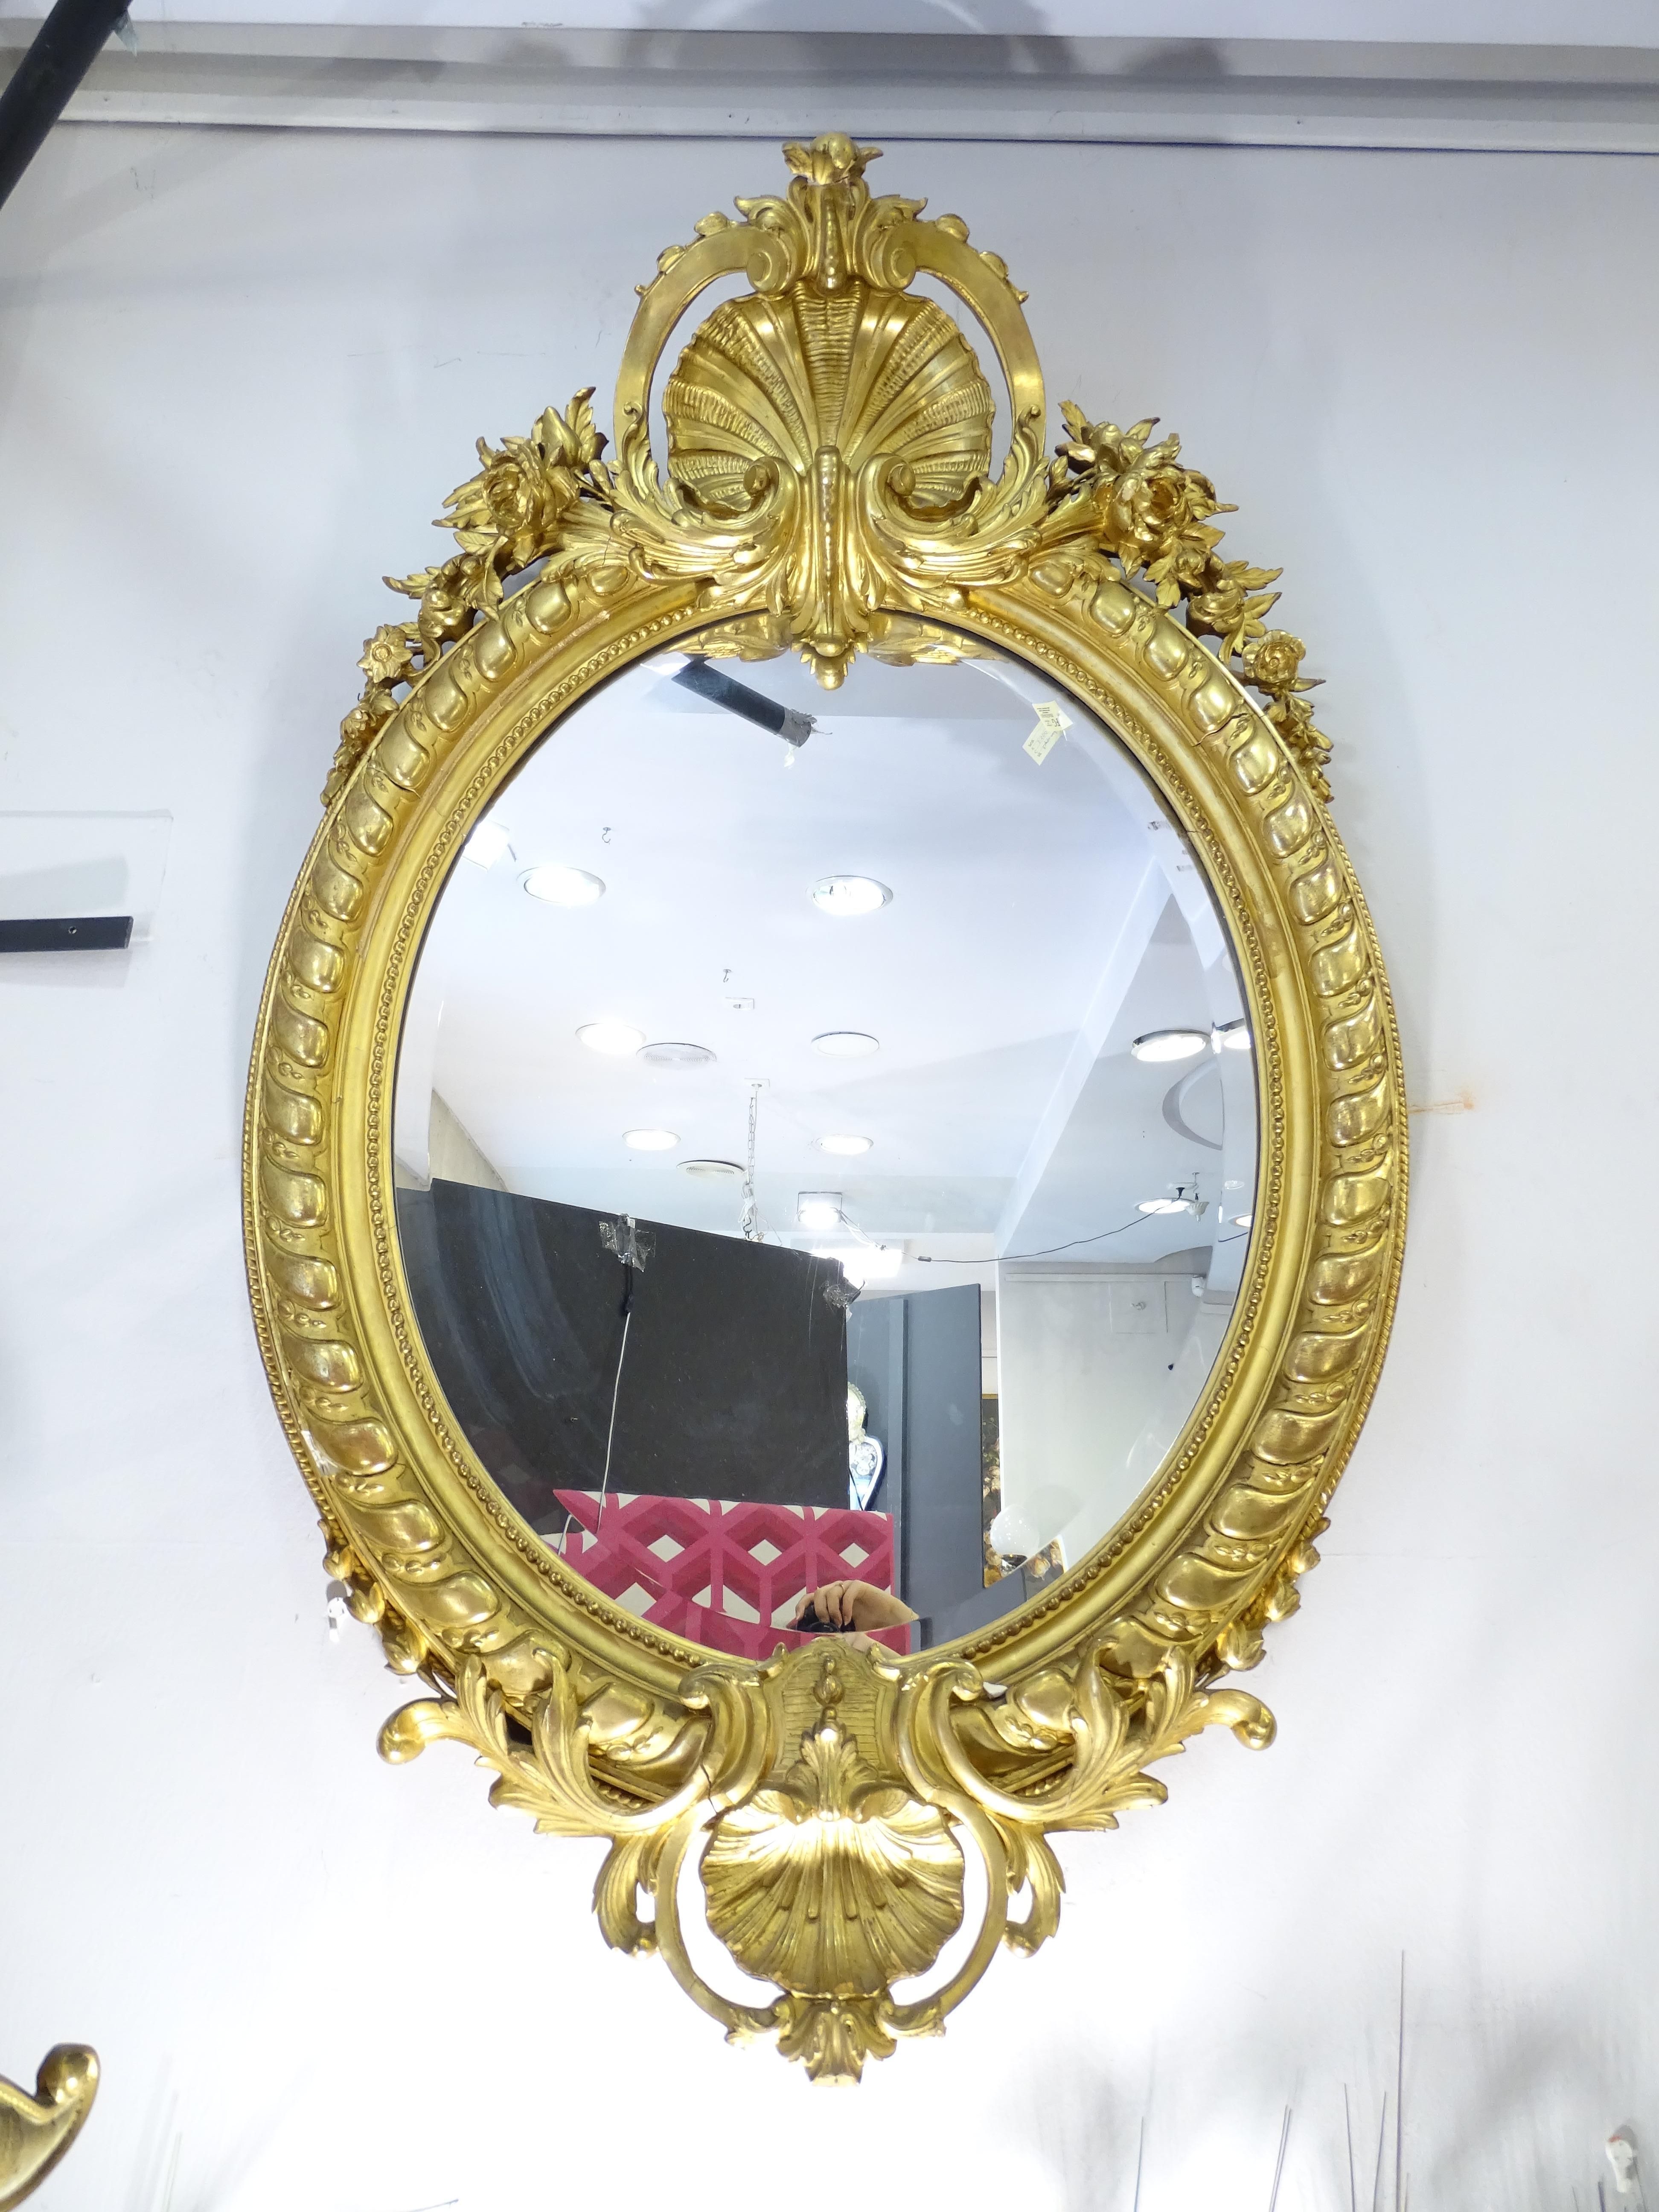 Outstanding mirror in carved and gilded wood with fine gold burnished in water with agate stone. It has an elegant oval profile made up of a double frame, the pearly interior and the chevroned exterior. The main ornament is the two central scallop